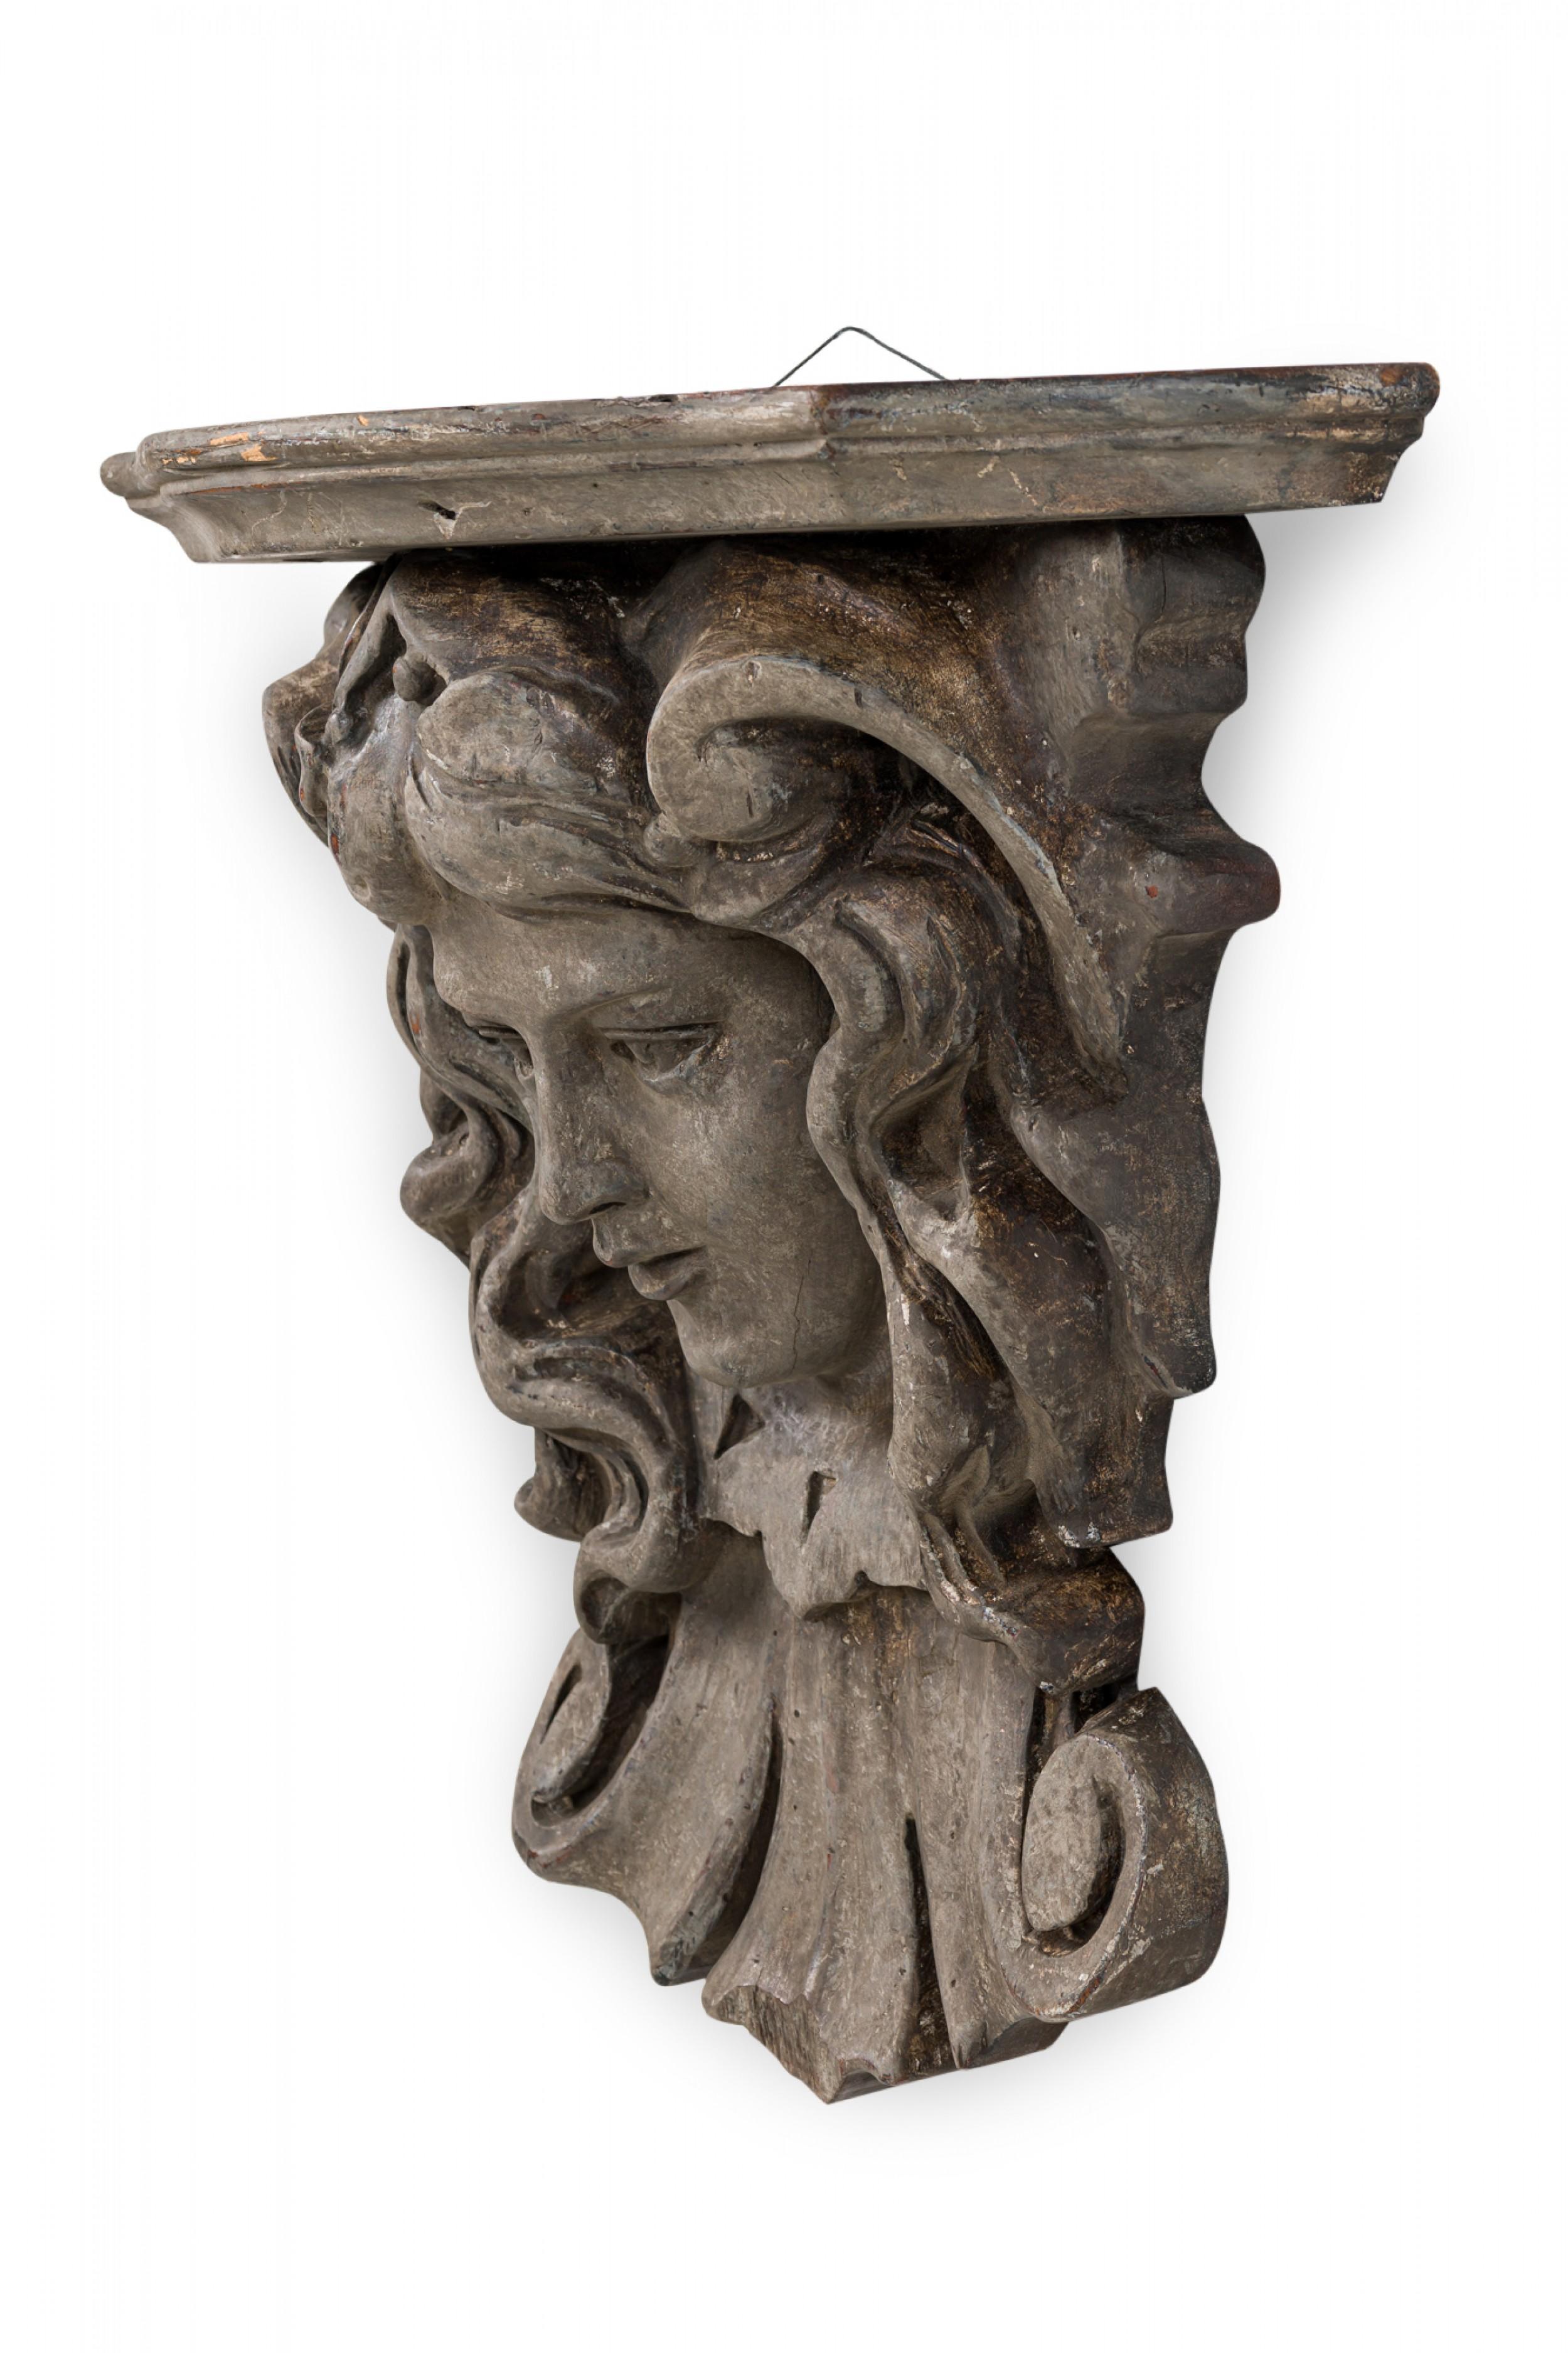 Italian Rococo Carved Wood Faux Bois Figural Wall Shelf / Architectural Element In Good Condition For Sale In New York, NY